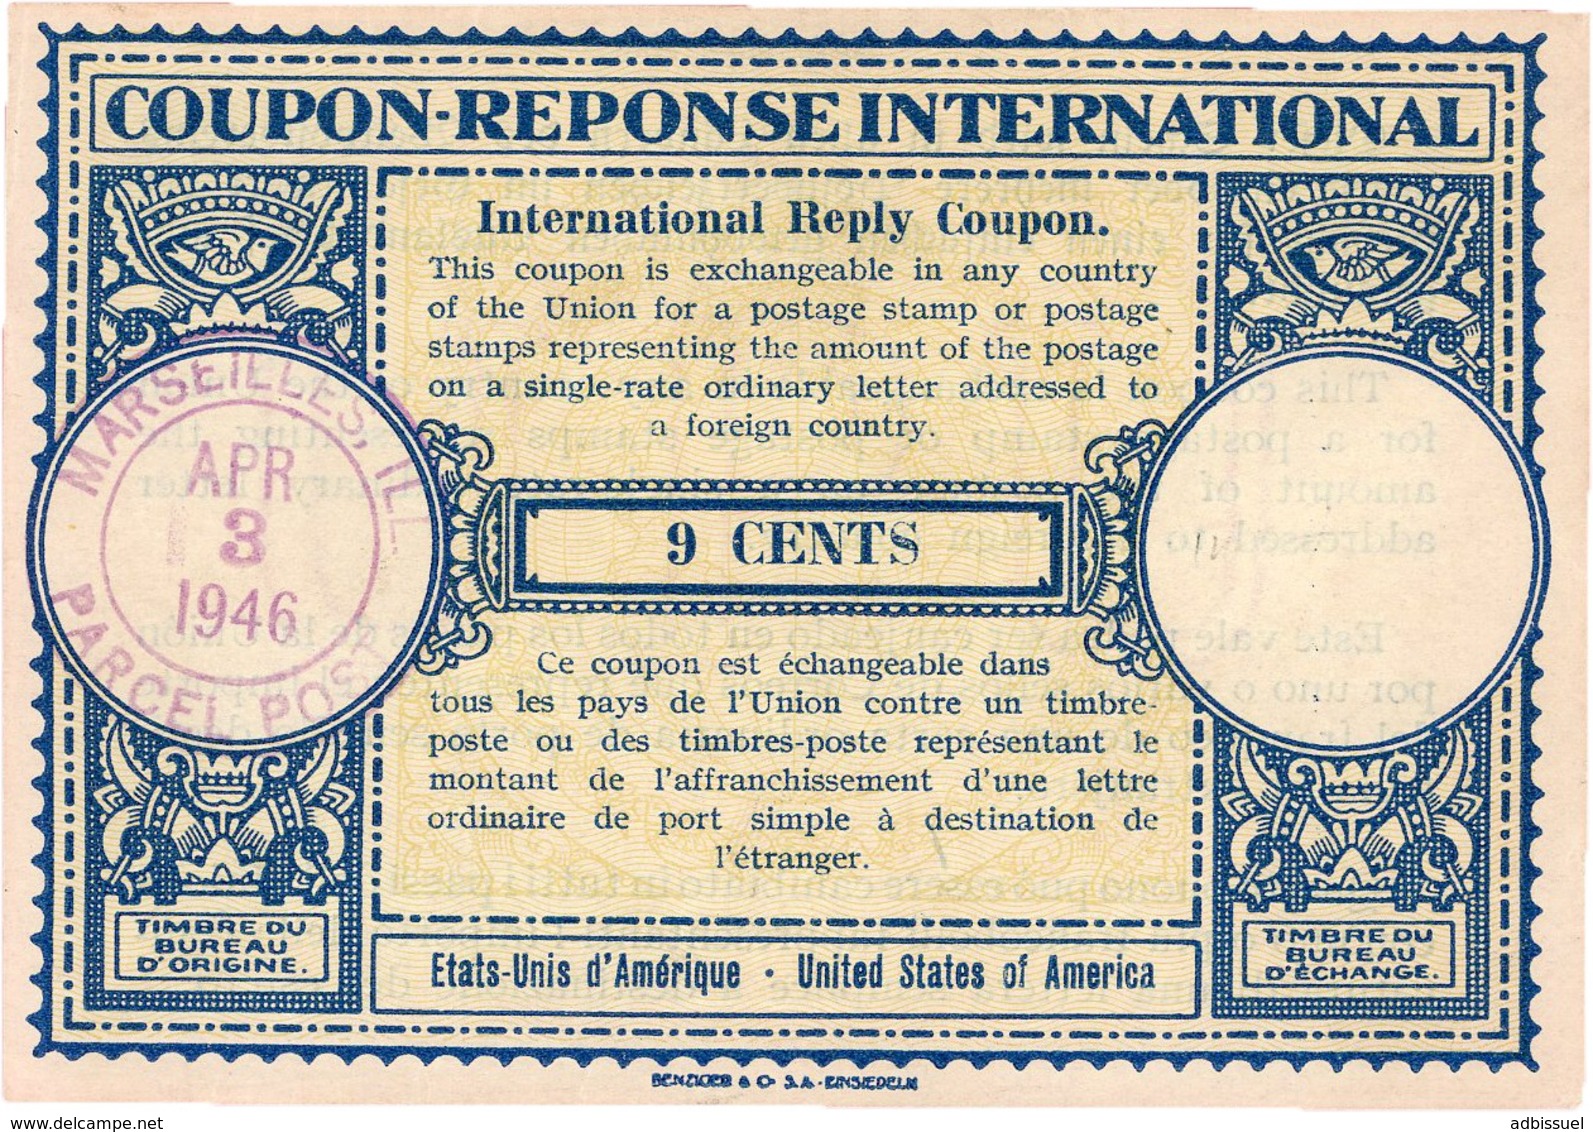 COUPON-REPONSE INTERNATIONAL USA Type Londres Obliteration Lilas "MARSEILLES ILL. PARCEL POST 3/4/46" / 9 Cents. TB - Cupón-respuesta